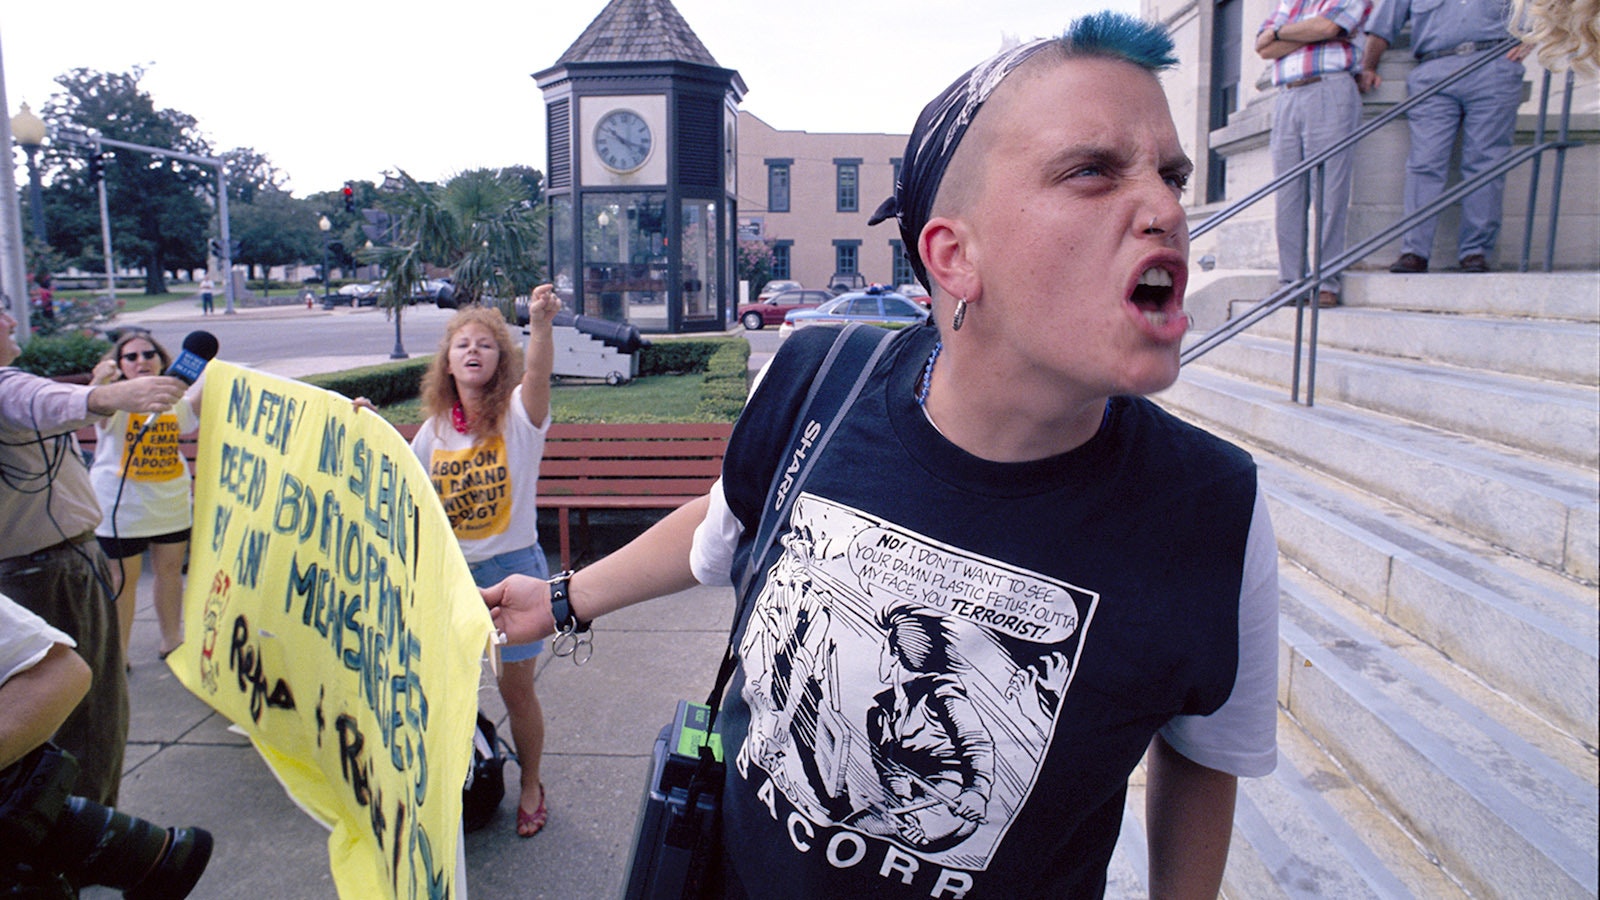 An angry and agitated abortion rights protester.